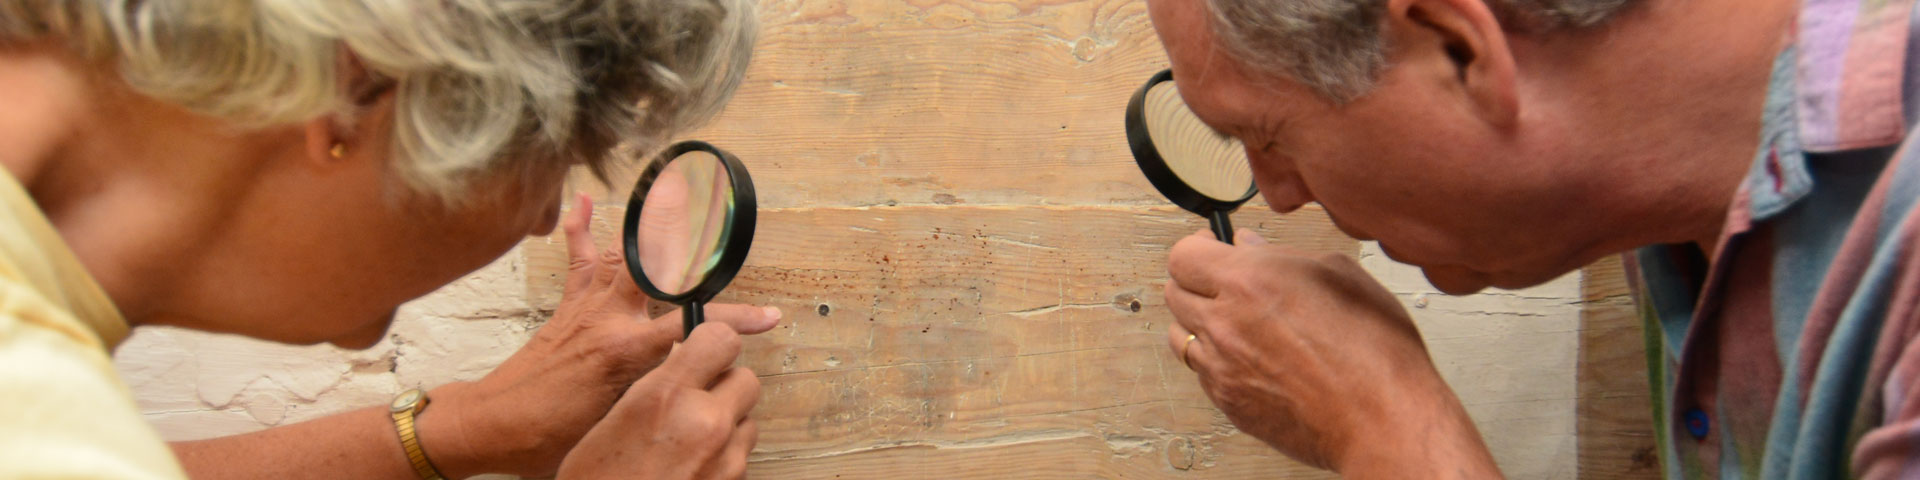 Visitors read historical graffiti with a magnifying glass. 